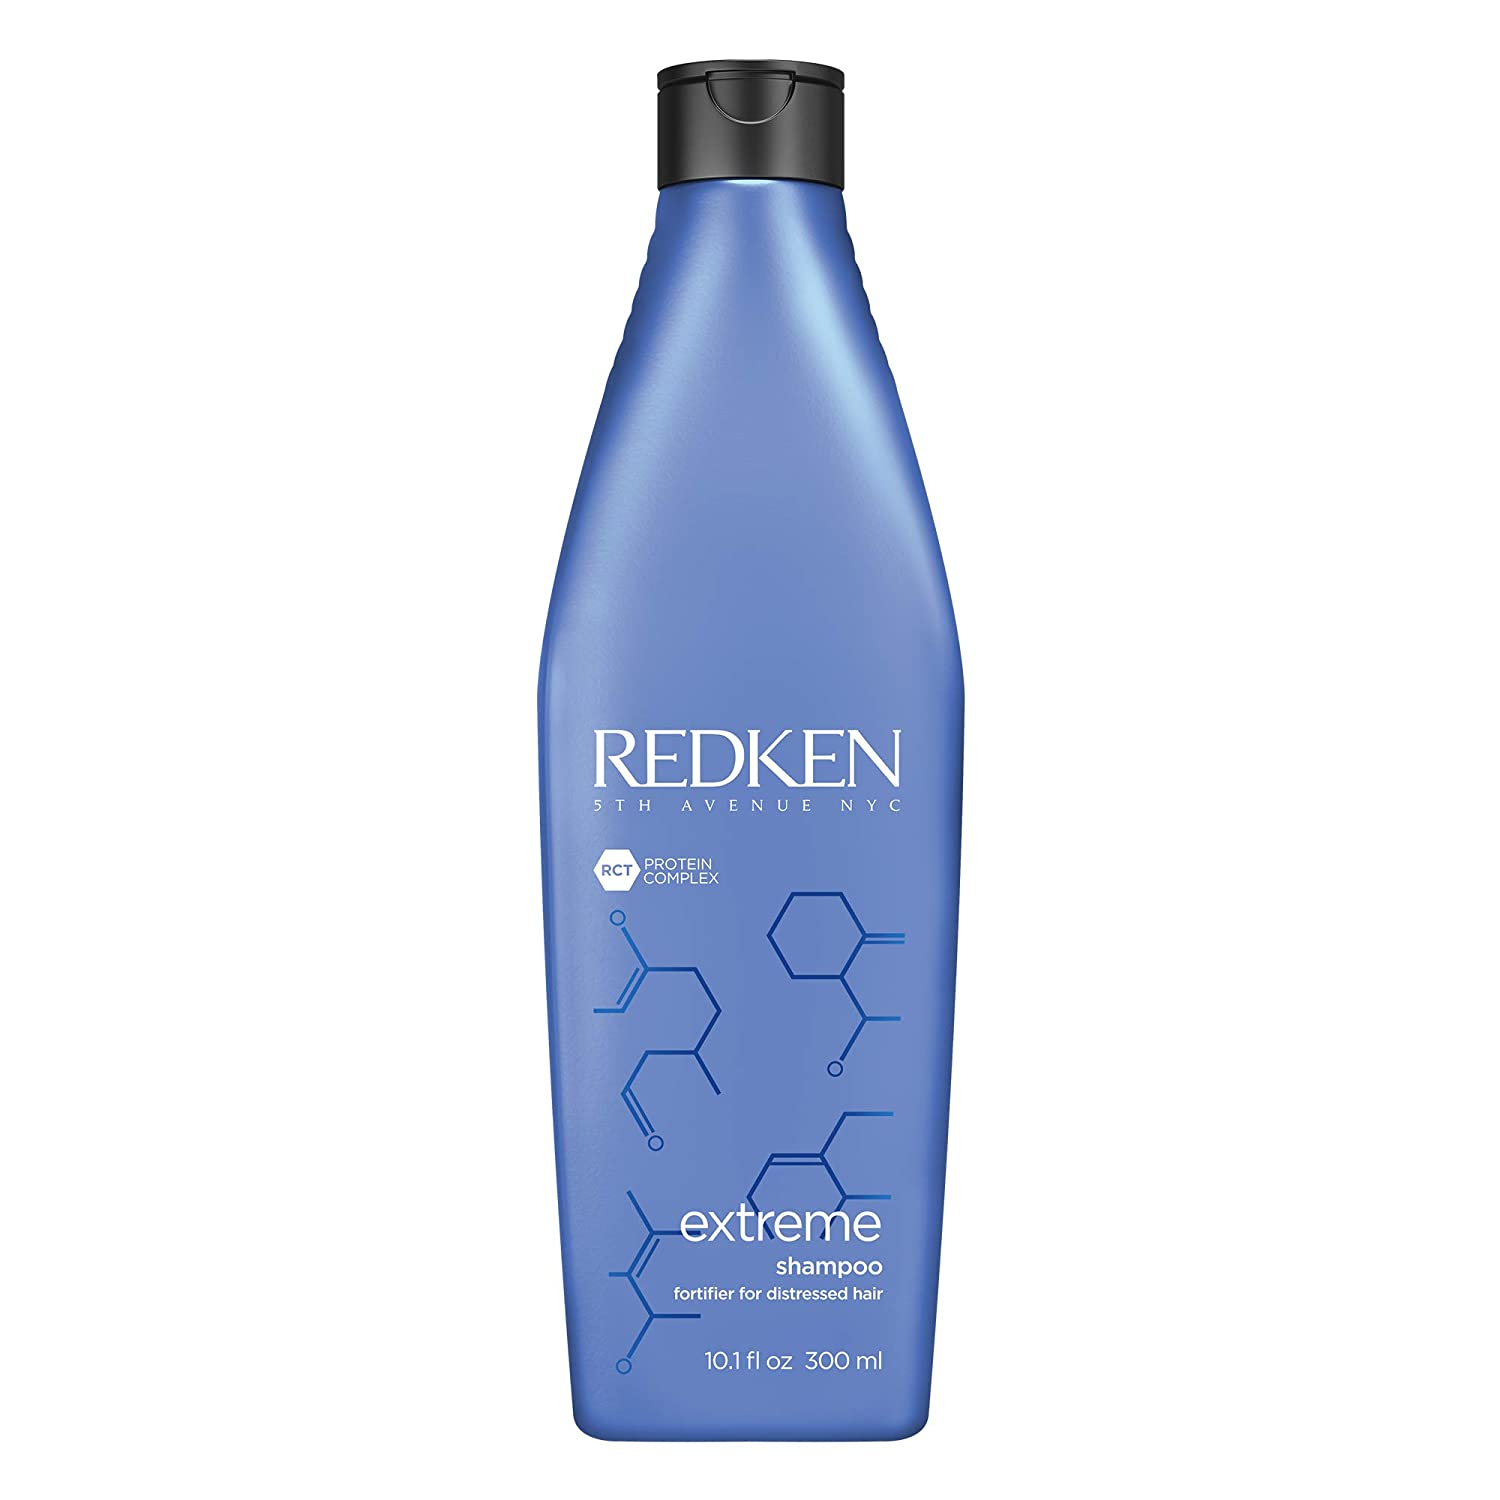 Redken Extreme Shampoo, Building Care for Damaged and Dry Hair, Protein Hair Care, Strengthening and Repairing, Shine Shampoo for Strong Hair